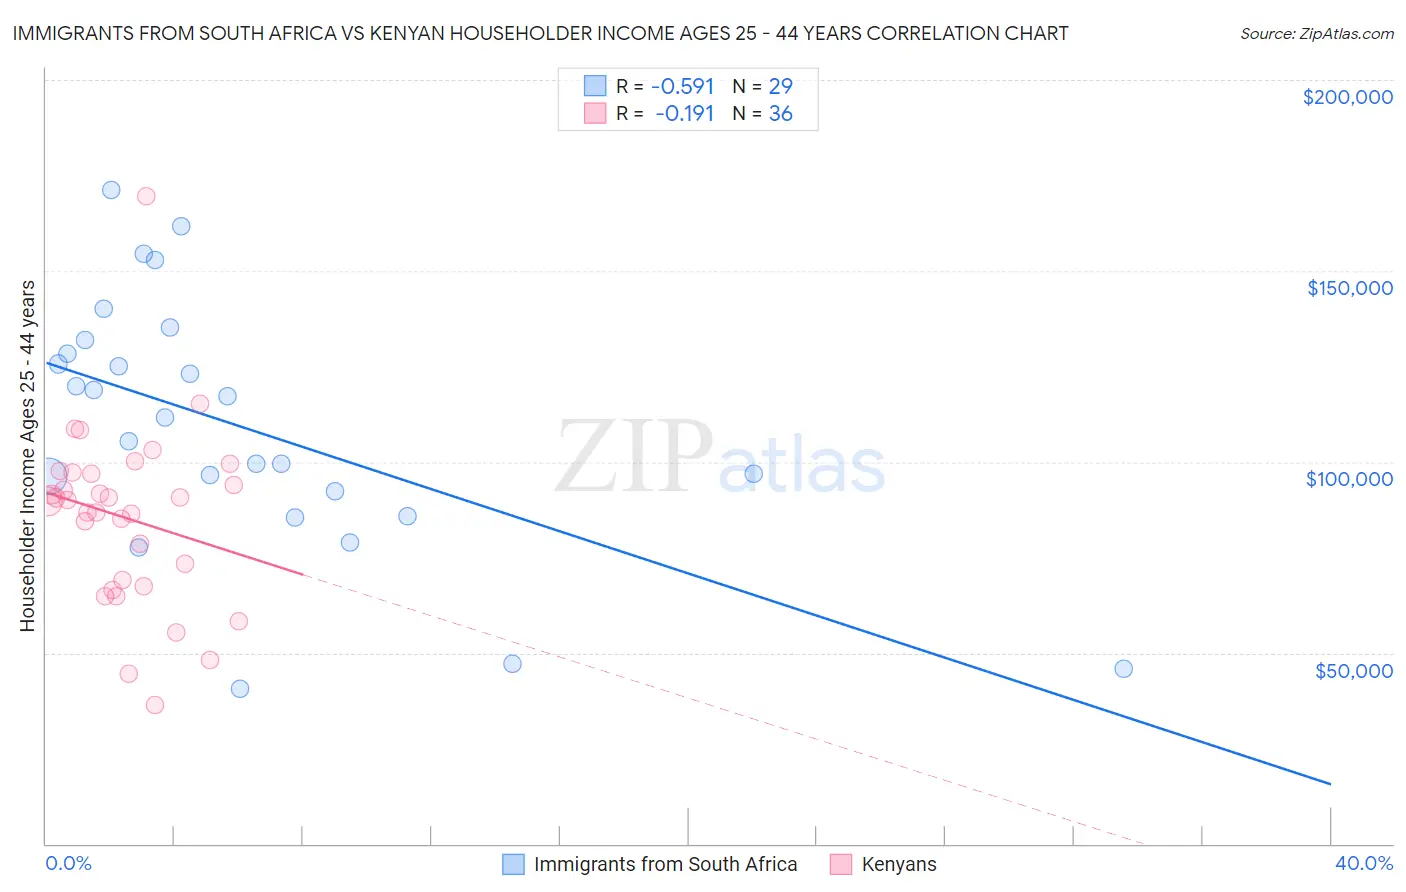 Immigrants from South Africa vs Kenyan Householder Income Ages 25 - 44 years